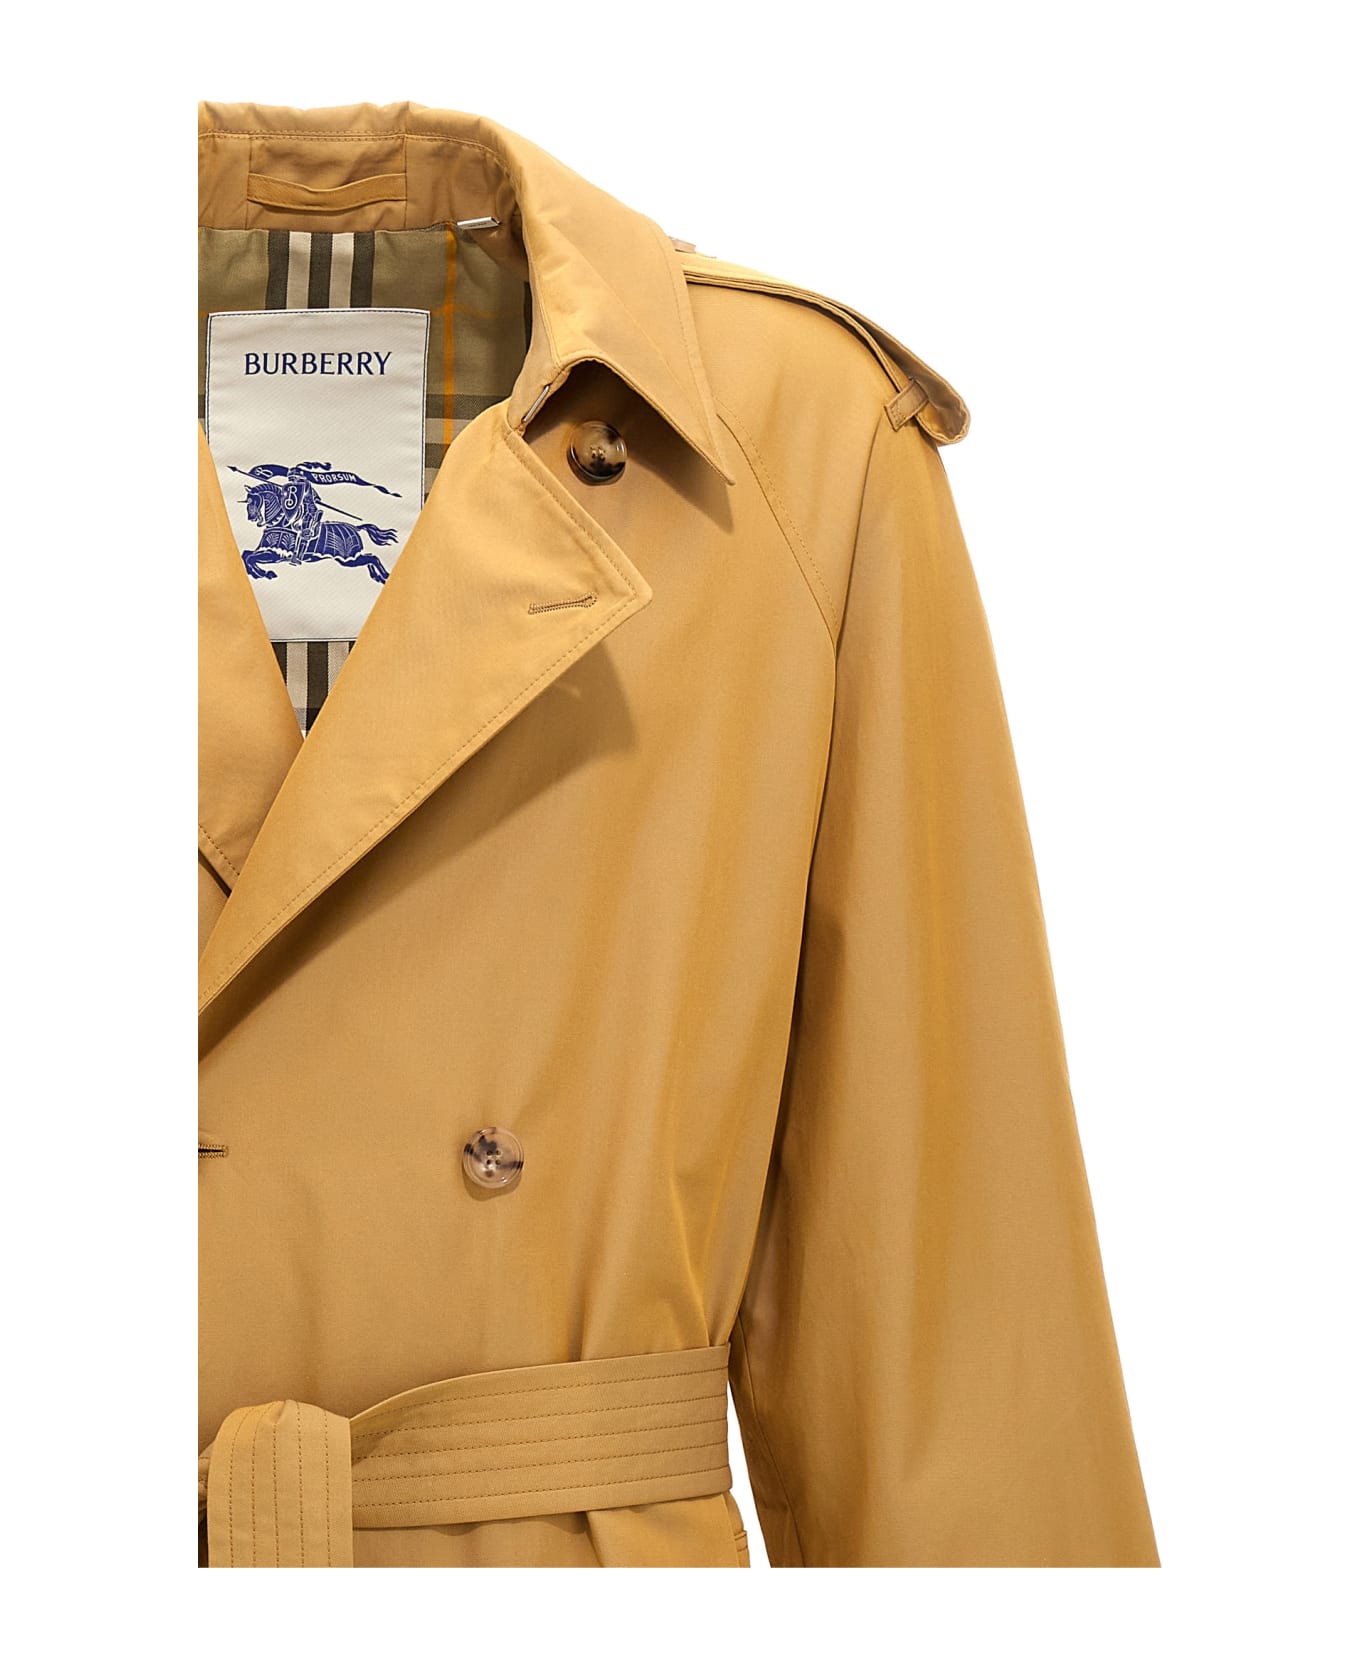 Burberry Double-breasted Long Trench Coat - Beige